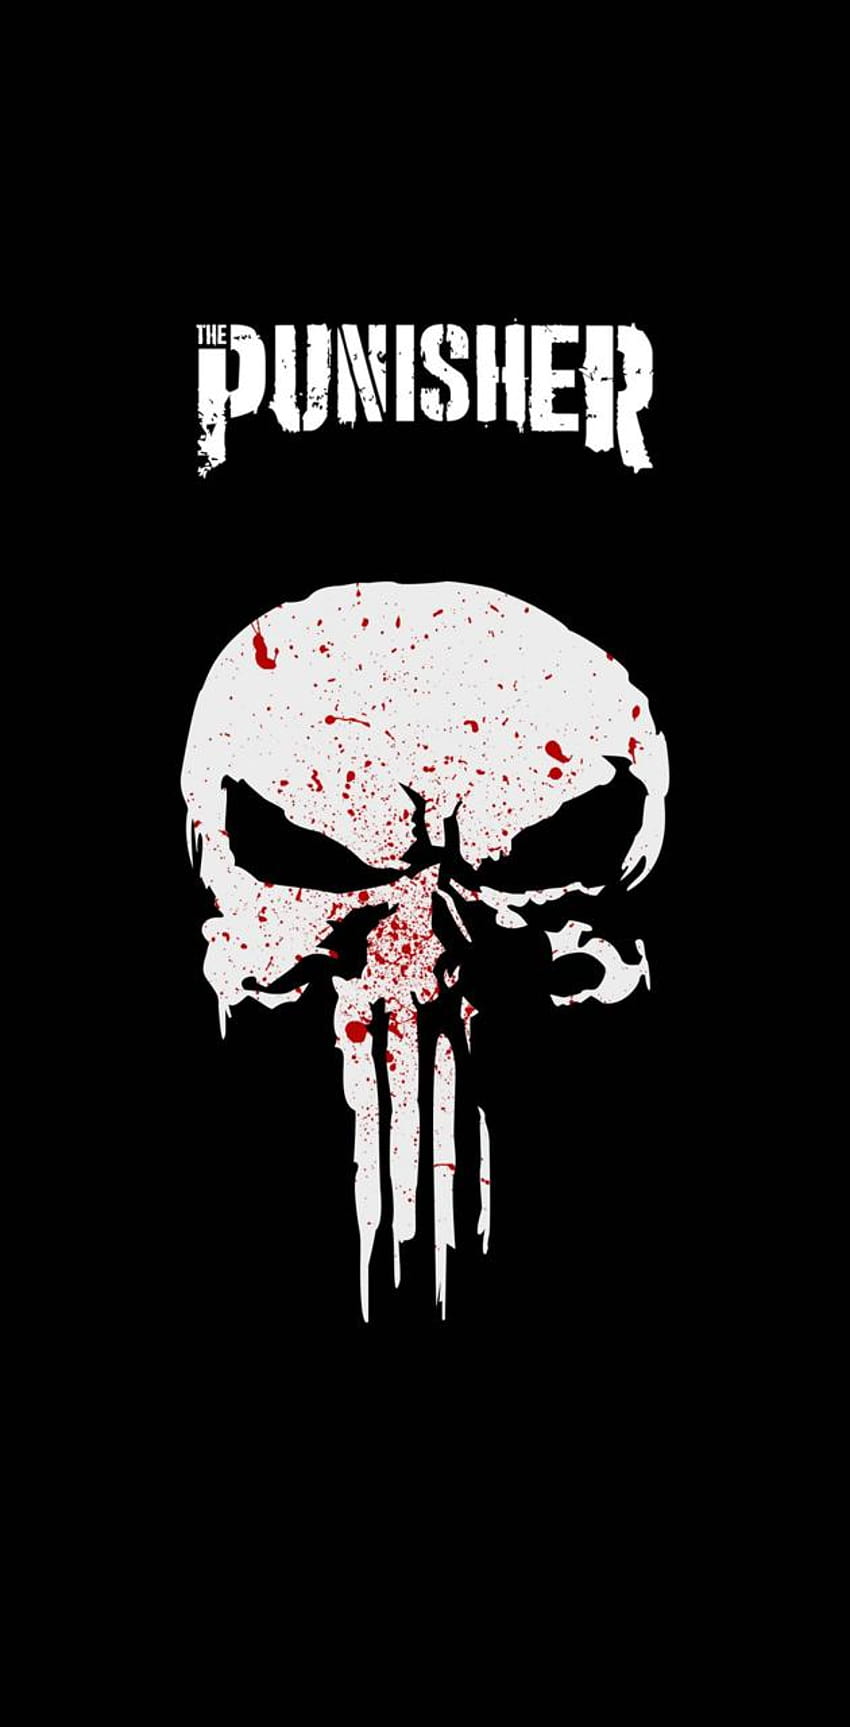 The Punisher by ShmuelRosenbluth, the punisher android HD phone wallpaper